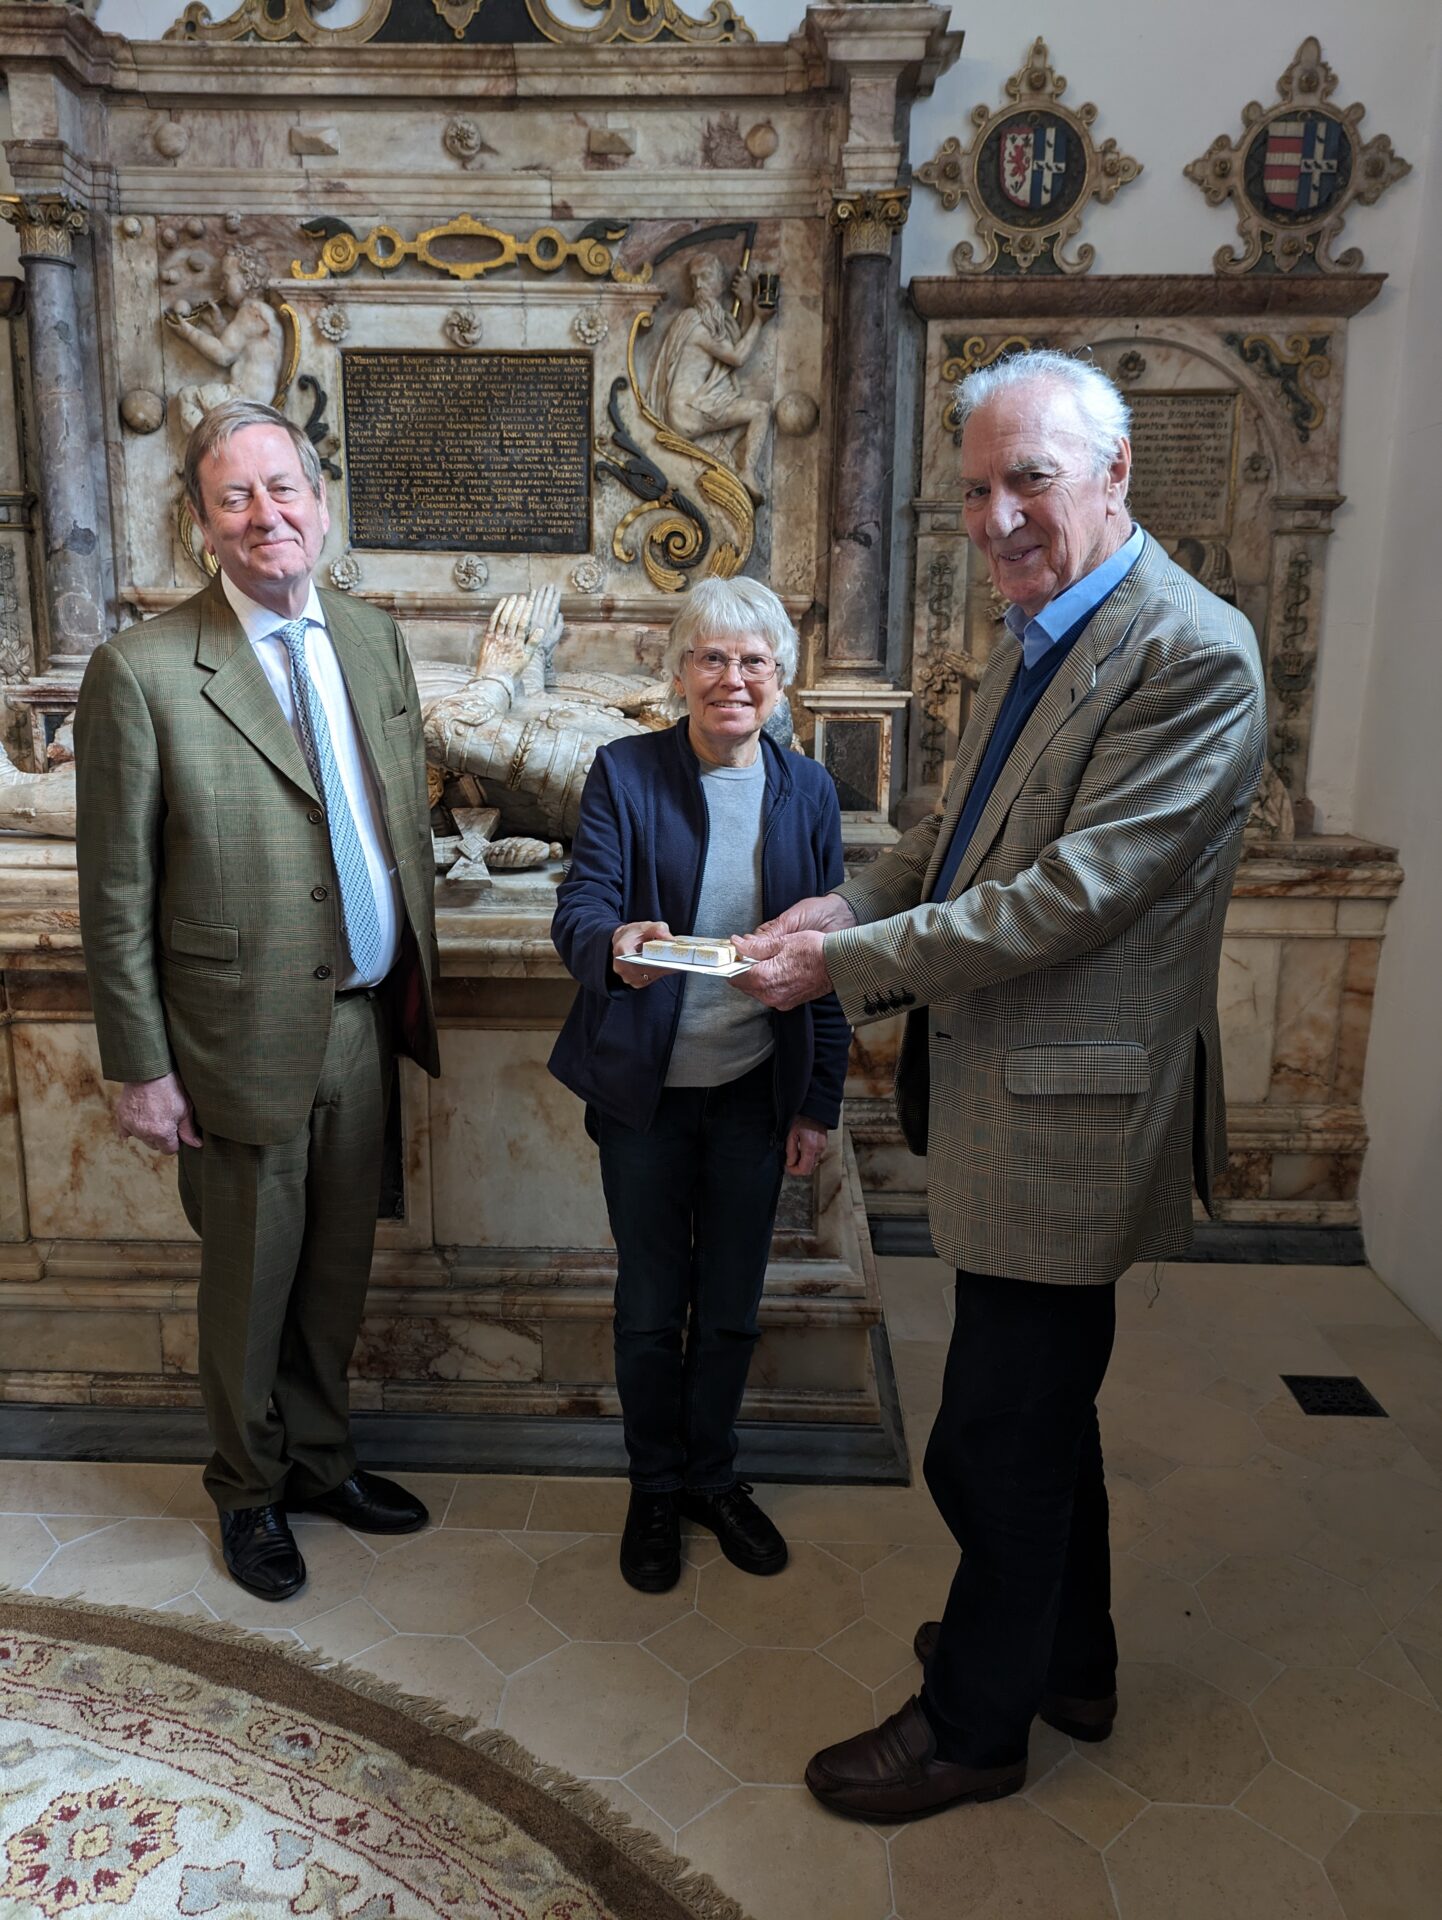 Chris receiving a gift and card from Roger Musson, Chair of Trustees, observed by our Patron Michael More-Molyneux, HM Lord-Lieutenant of Surrey, at the Loseley Chapel in St Nicolas Church, Guildford